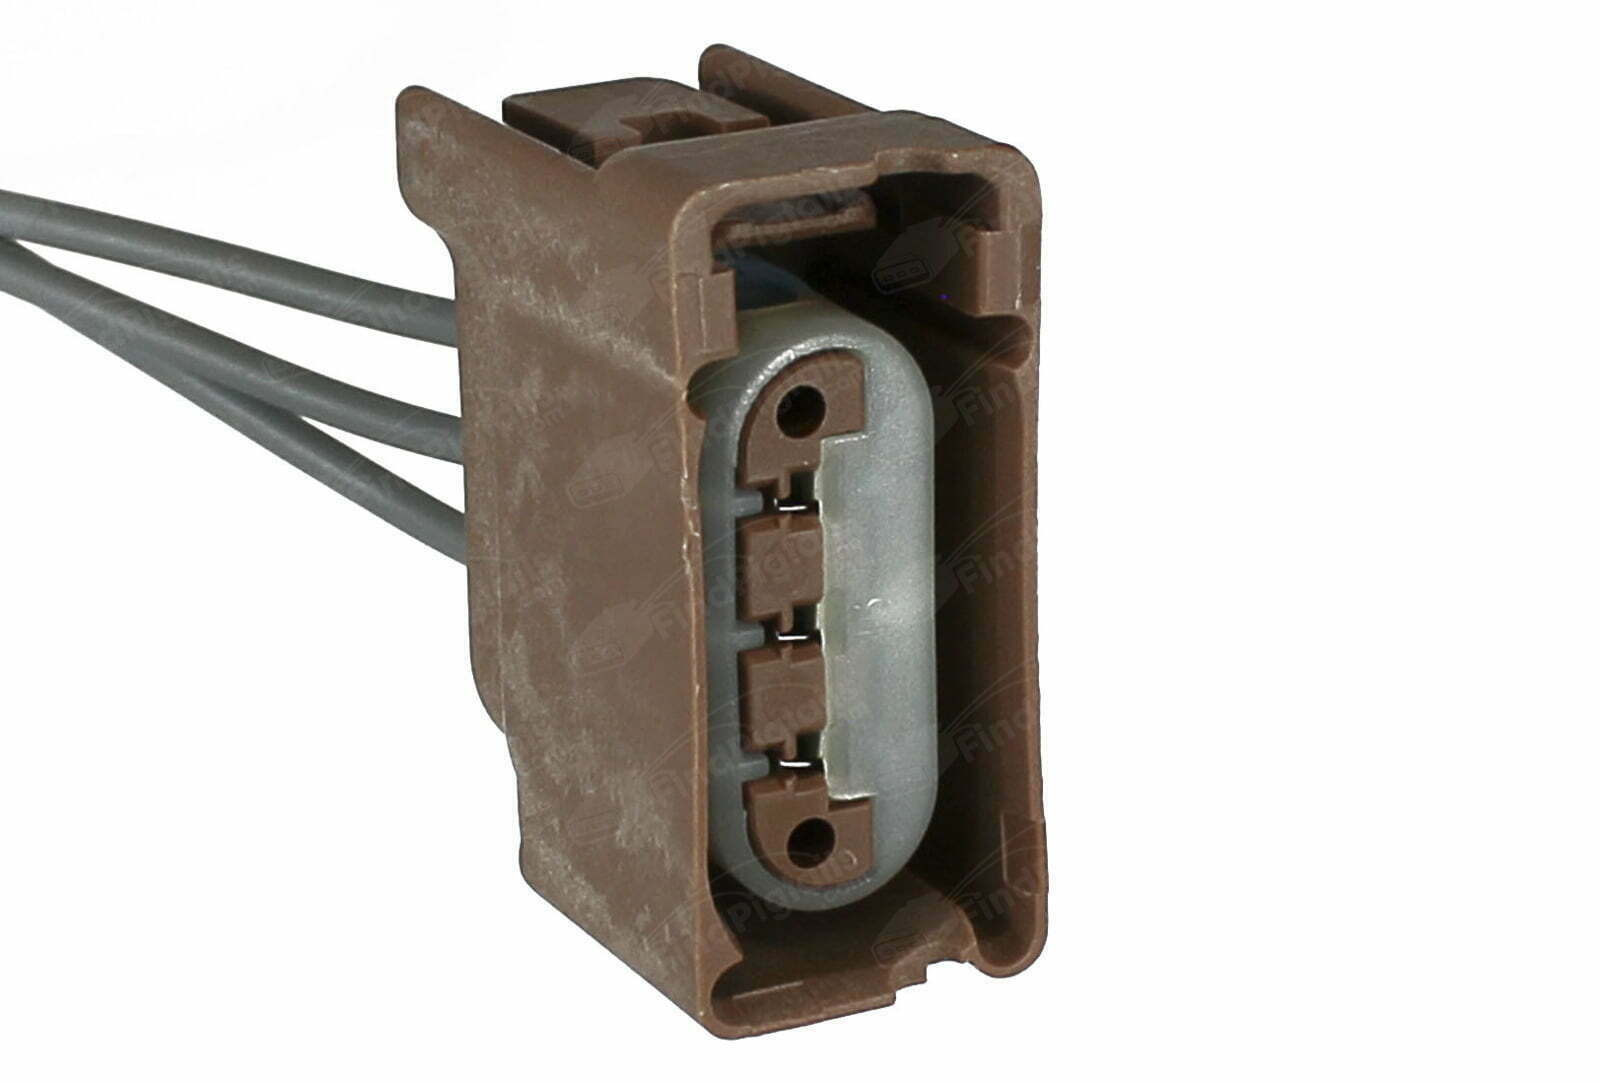 B27A3 is a 3-pin automotive connector which serves at least 283 functions for 45+ vehicles.